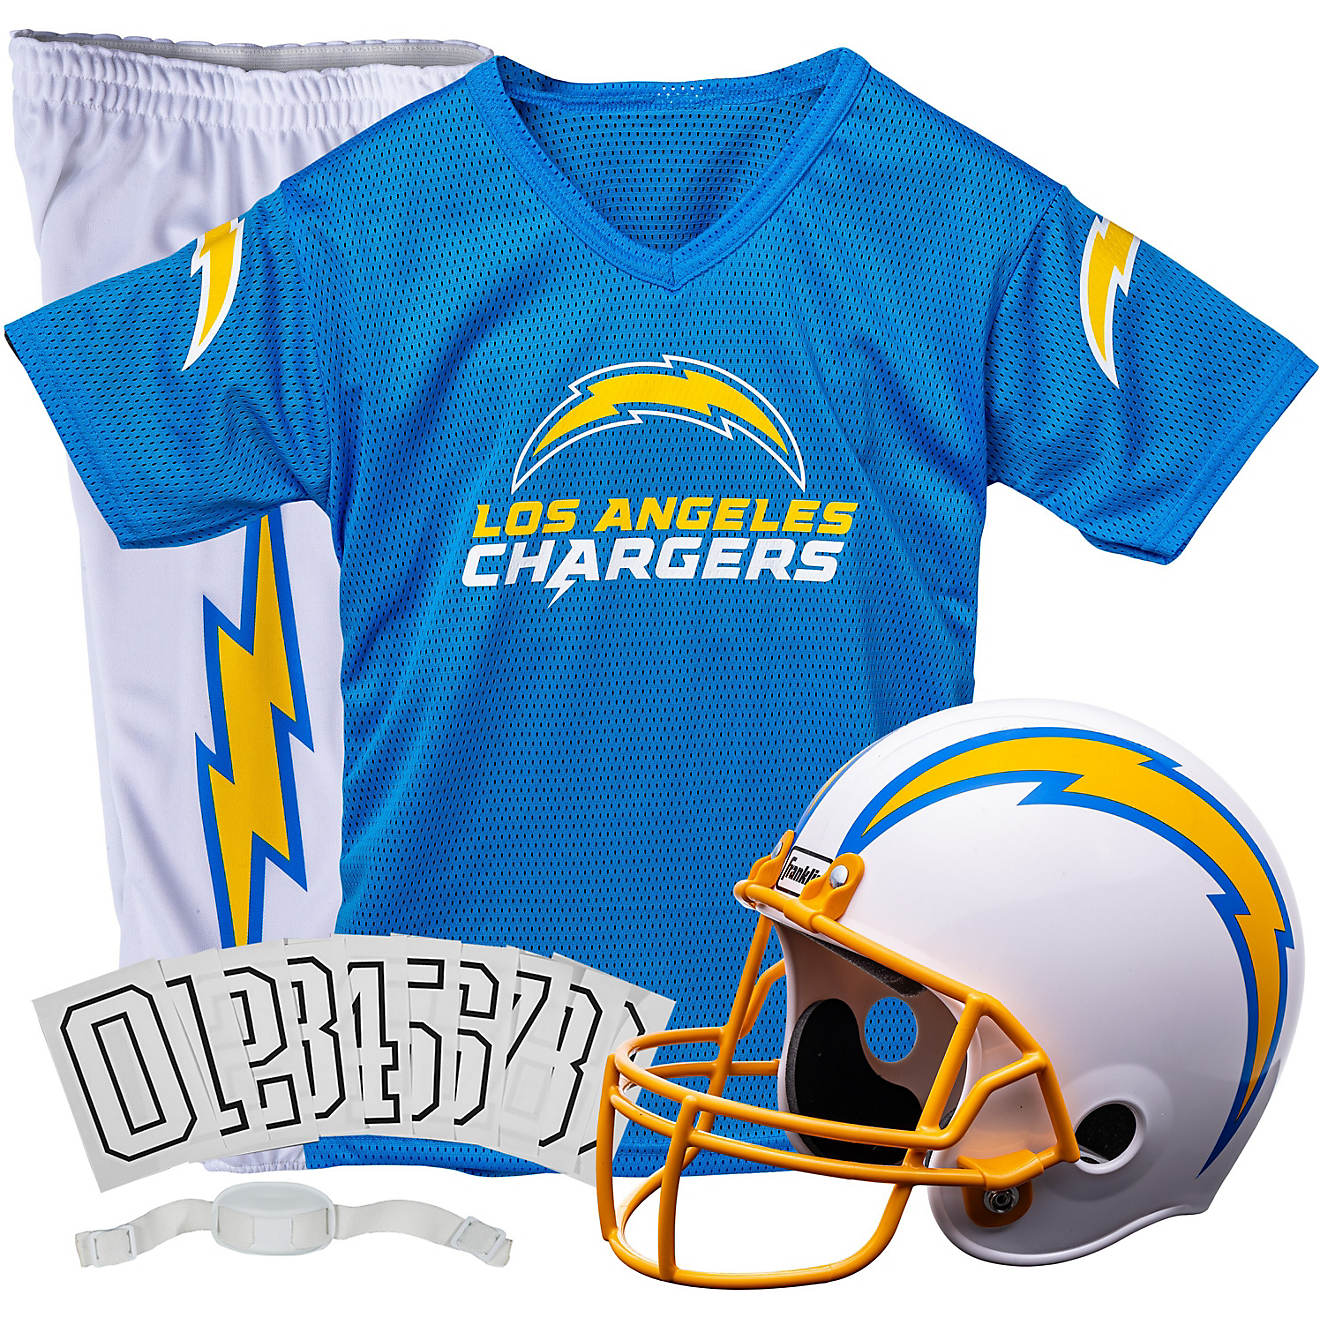 Franklin Youth San Diego Chargers Deluxe Football Uniform Set